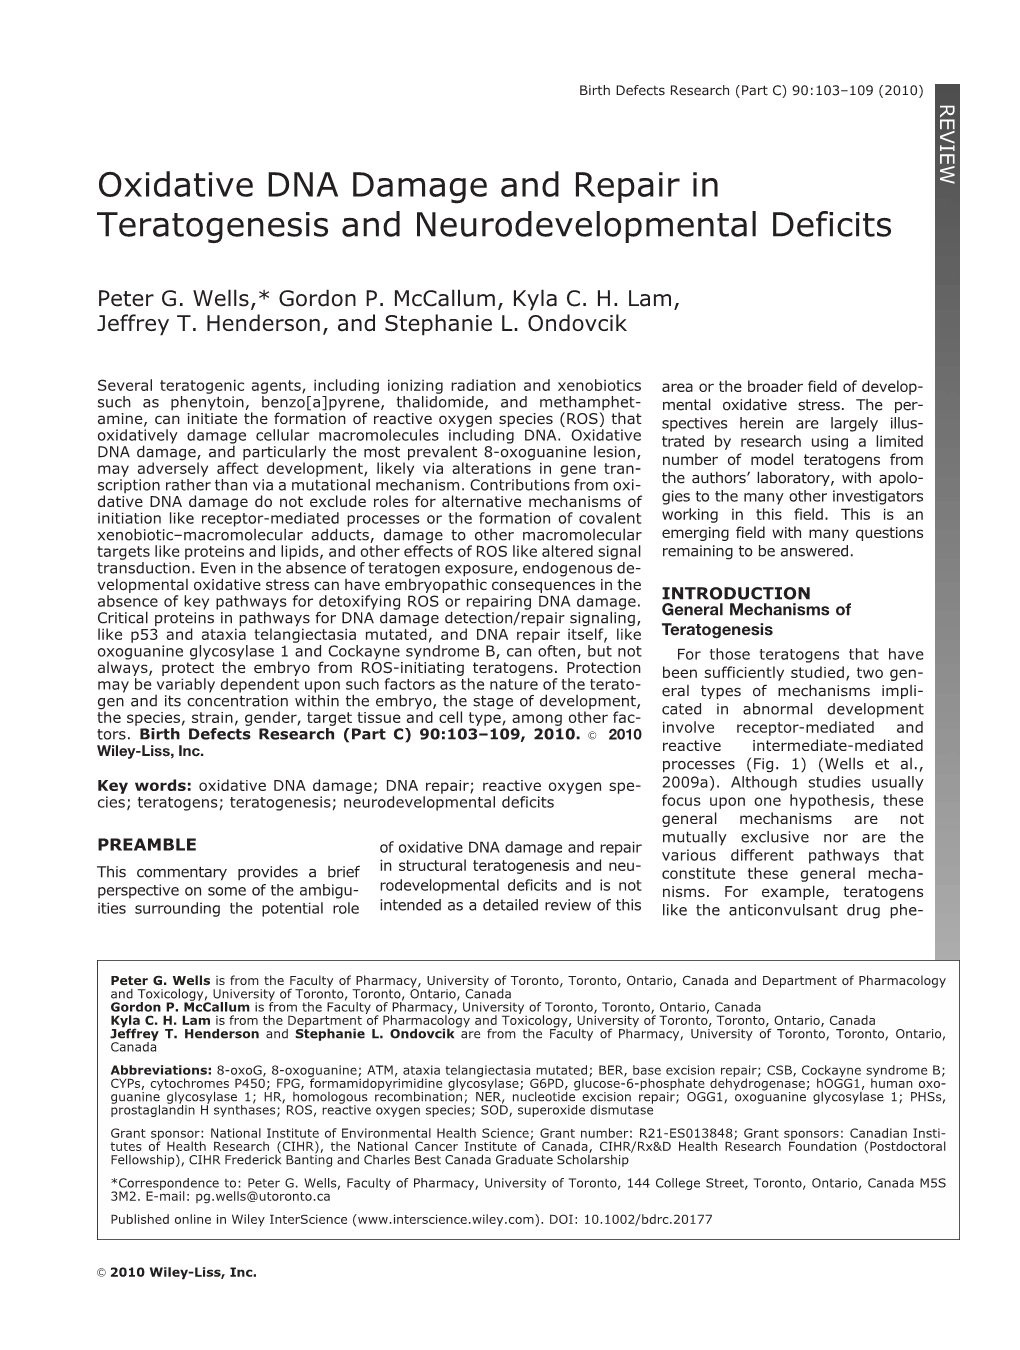 Oxidative DNA Damage and Repair in Teratogenesis and Neurodevelopmental Deficits